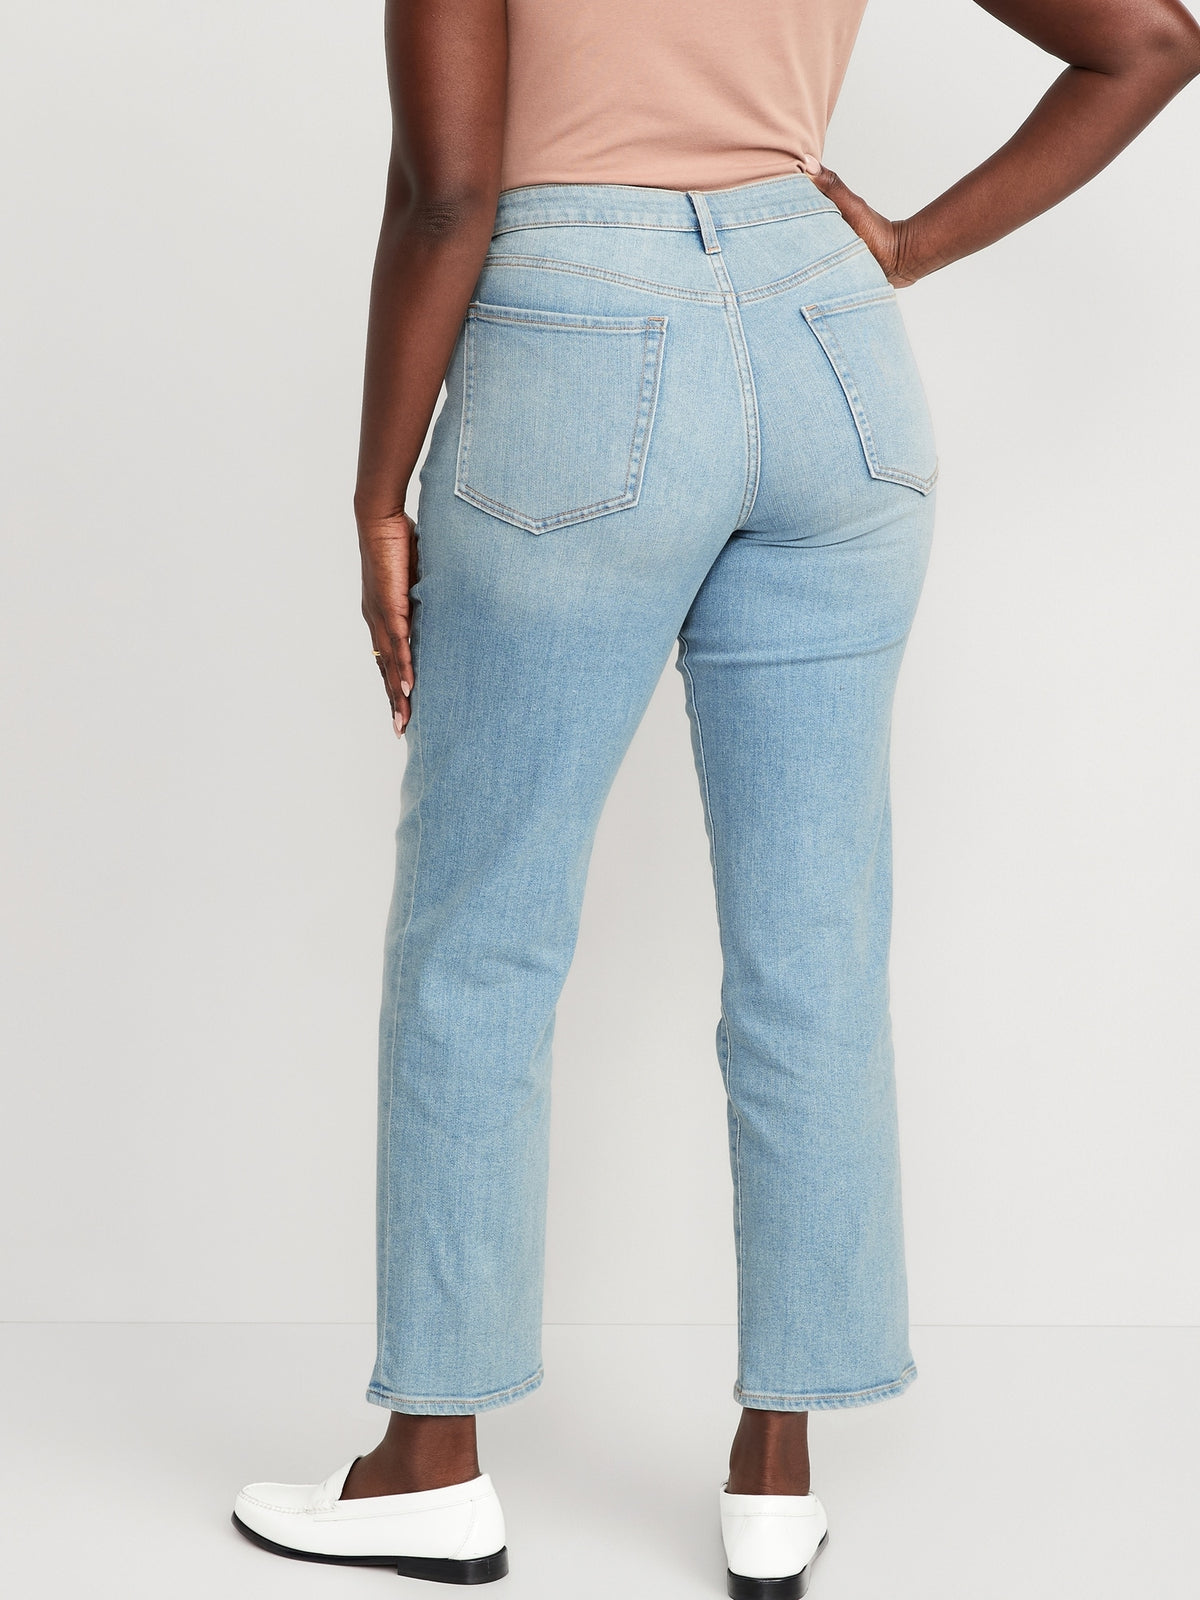 High-Waisted Wow Loose Jeans for Women - Old Navy Philippines